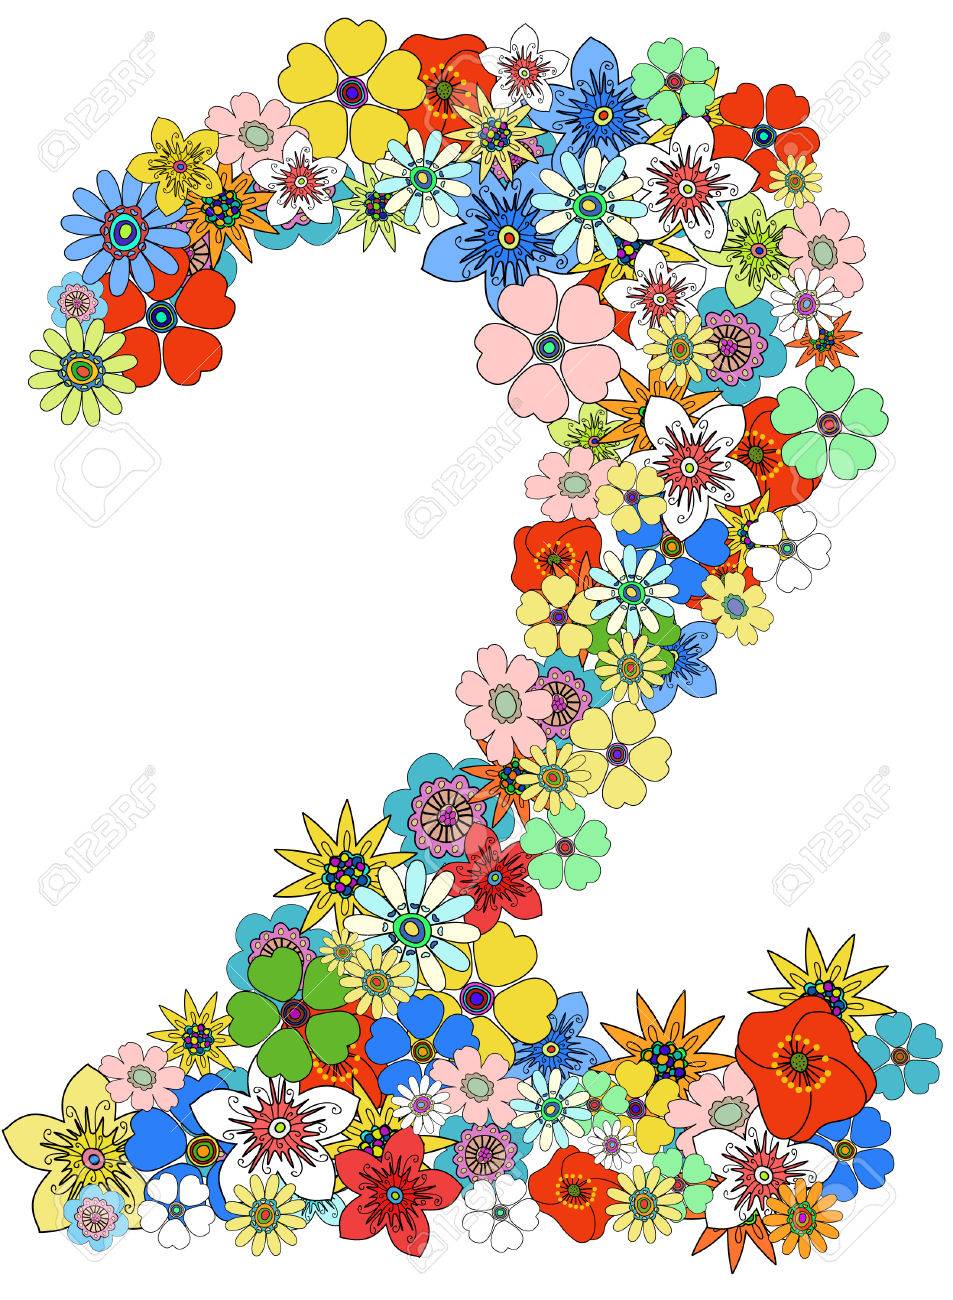 9077509-Number-two-floral-vector-See-more-on-my-portfolio-Stock-Vector-number-alphabet.jpg